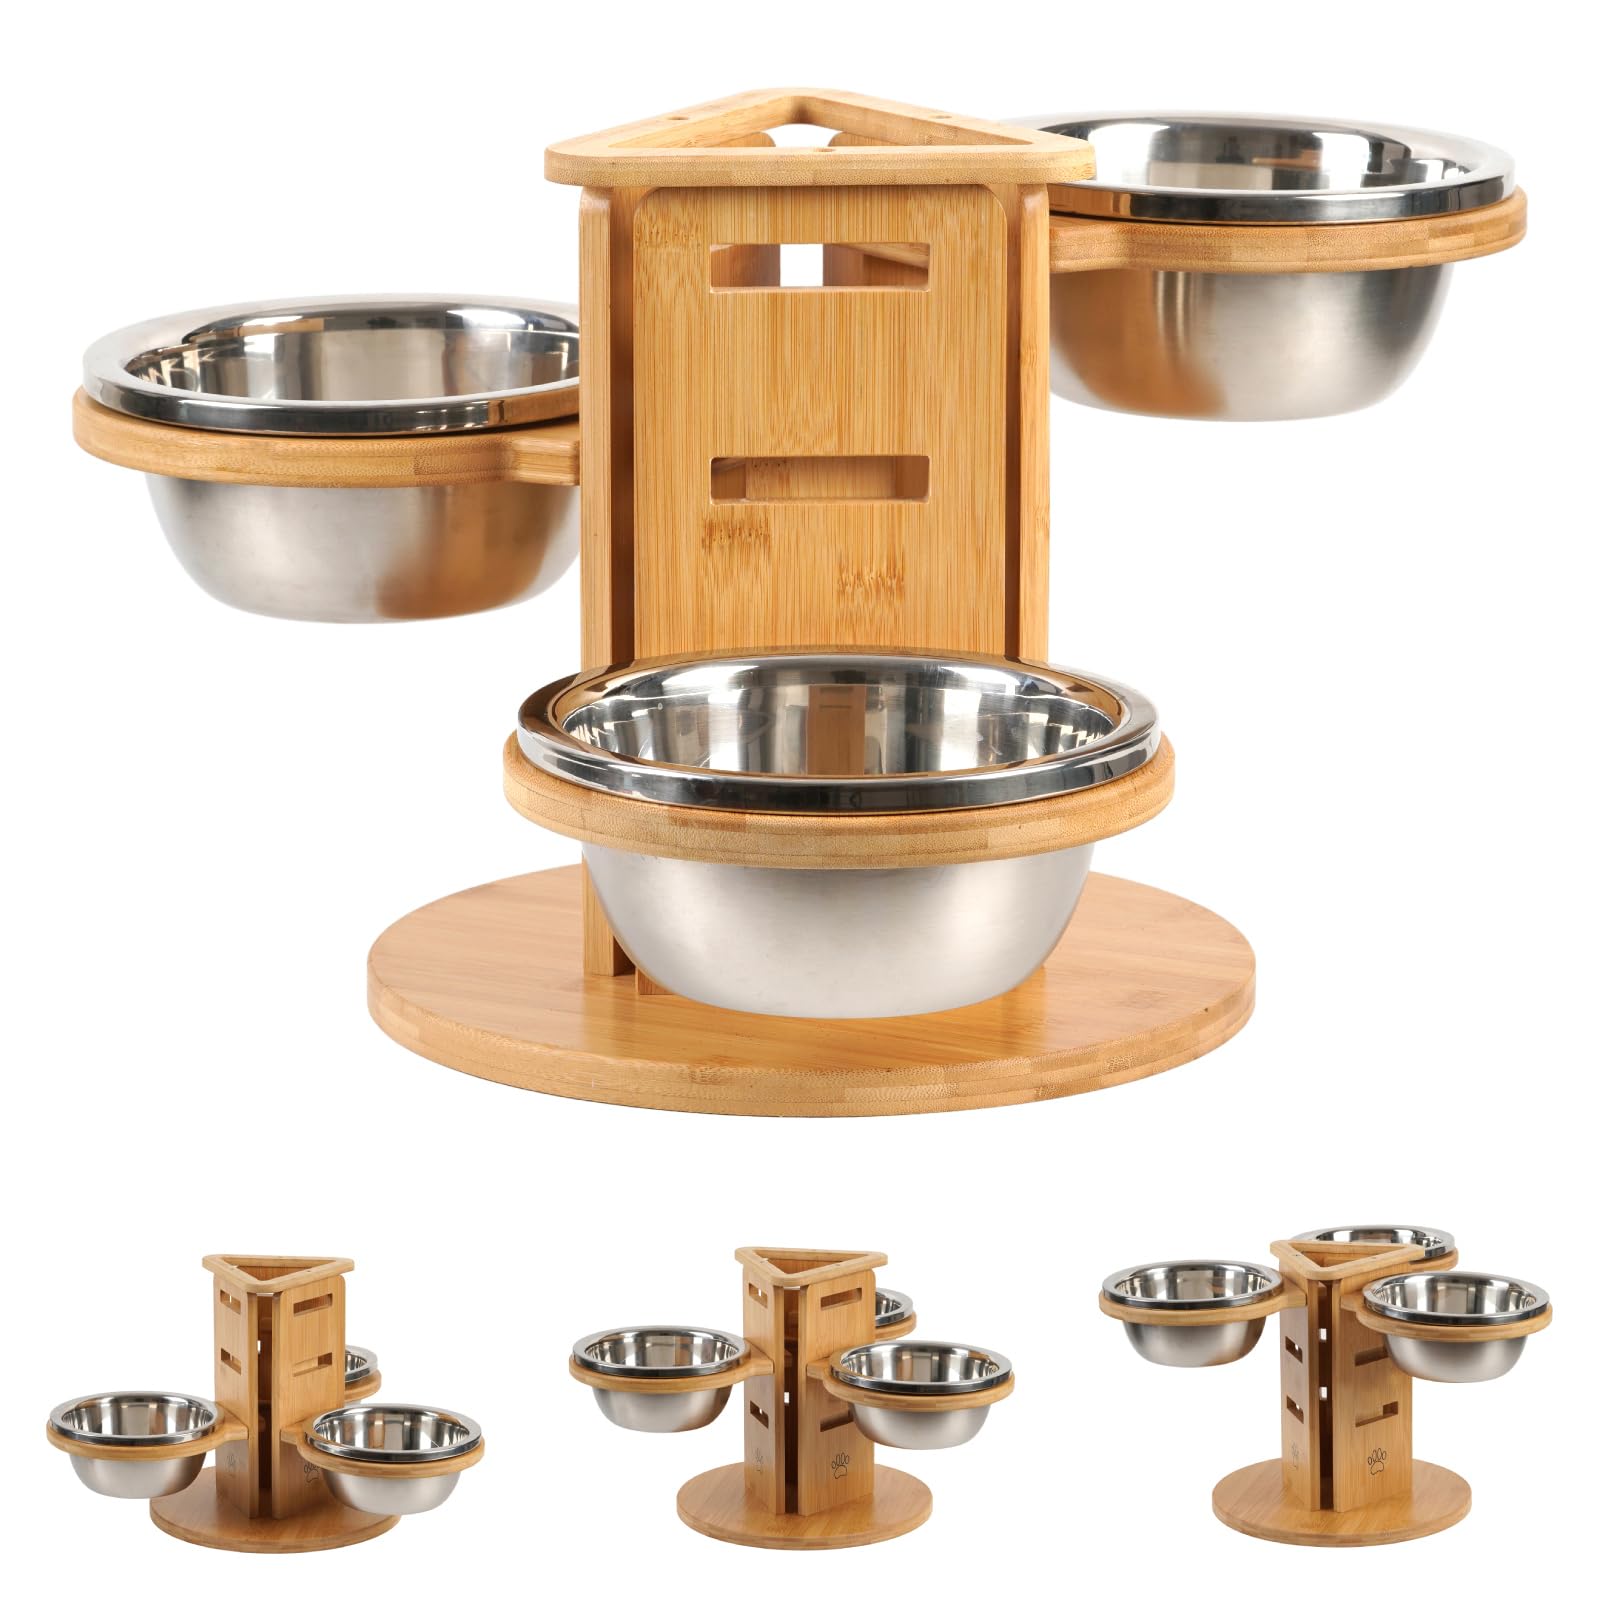 Adjustable 3-Bowl Dog Feeder with Raised Stand